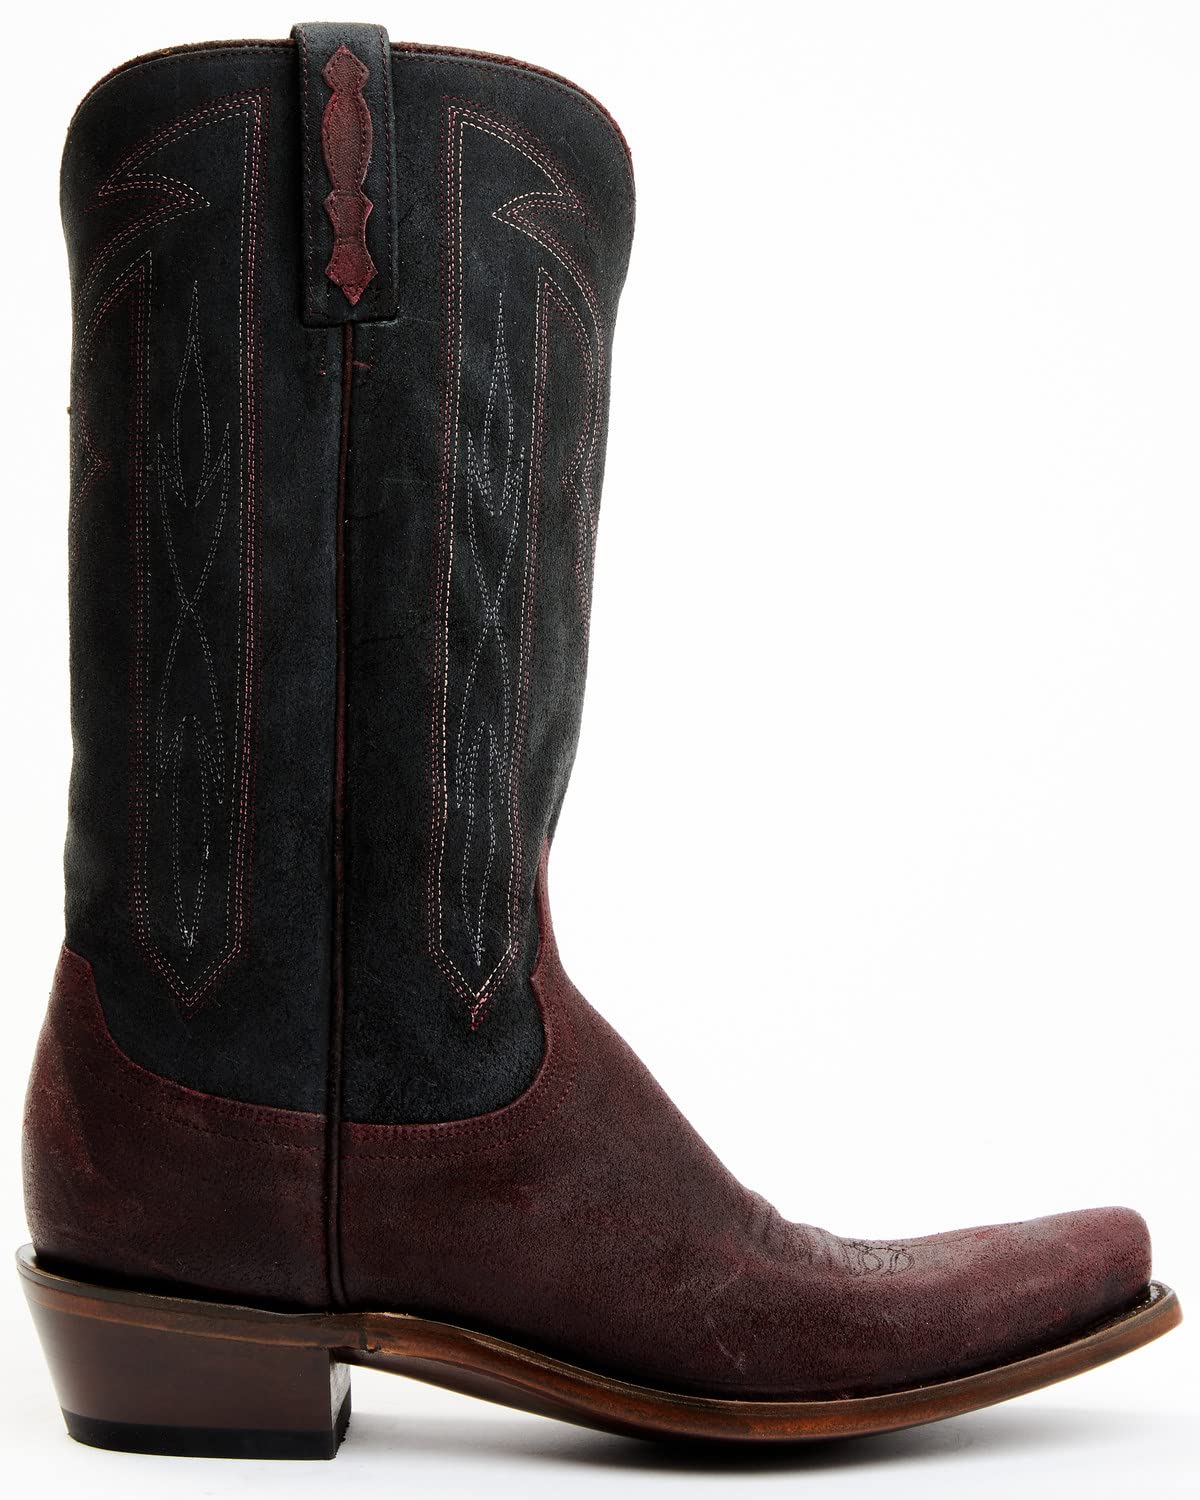 Lucchese mens Brazos